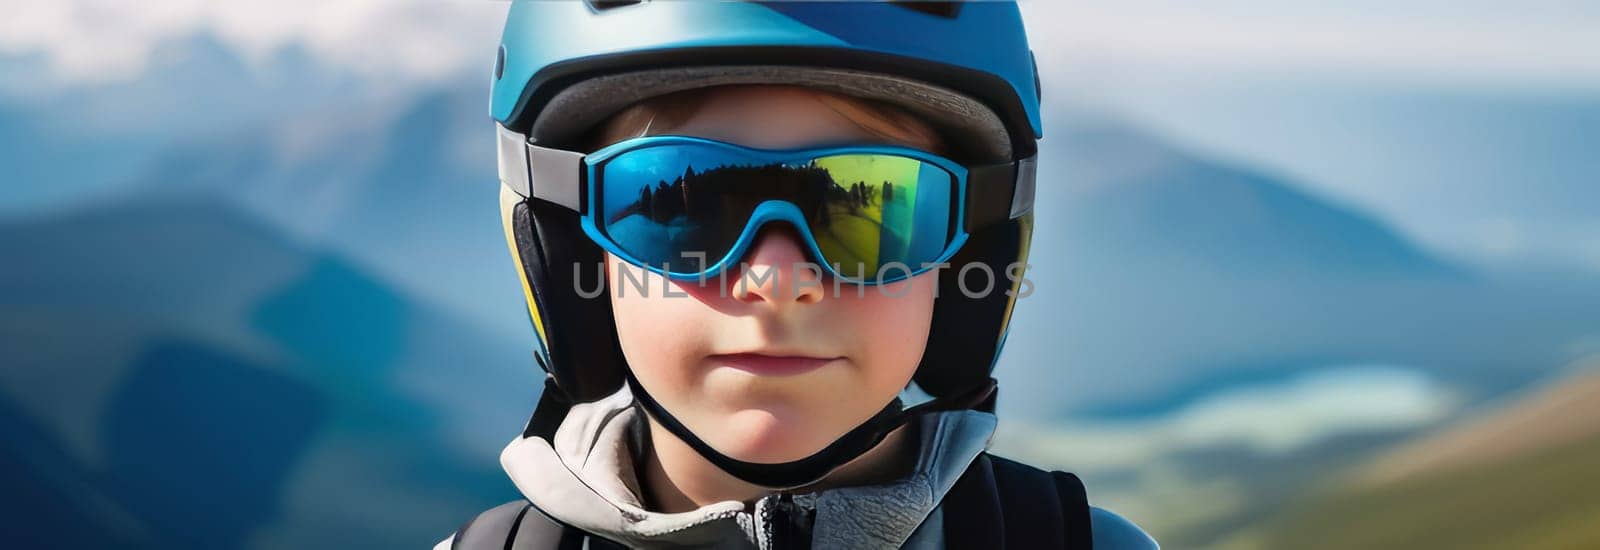 Young boy wearing helmet and sunglasses glasses stands confidently before towering mountain backdrop ready for adventure, exploration. He may be gearing up for bicycle ride, other outdoor activity